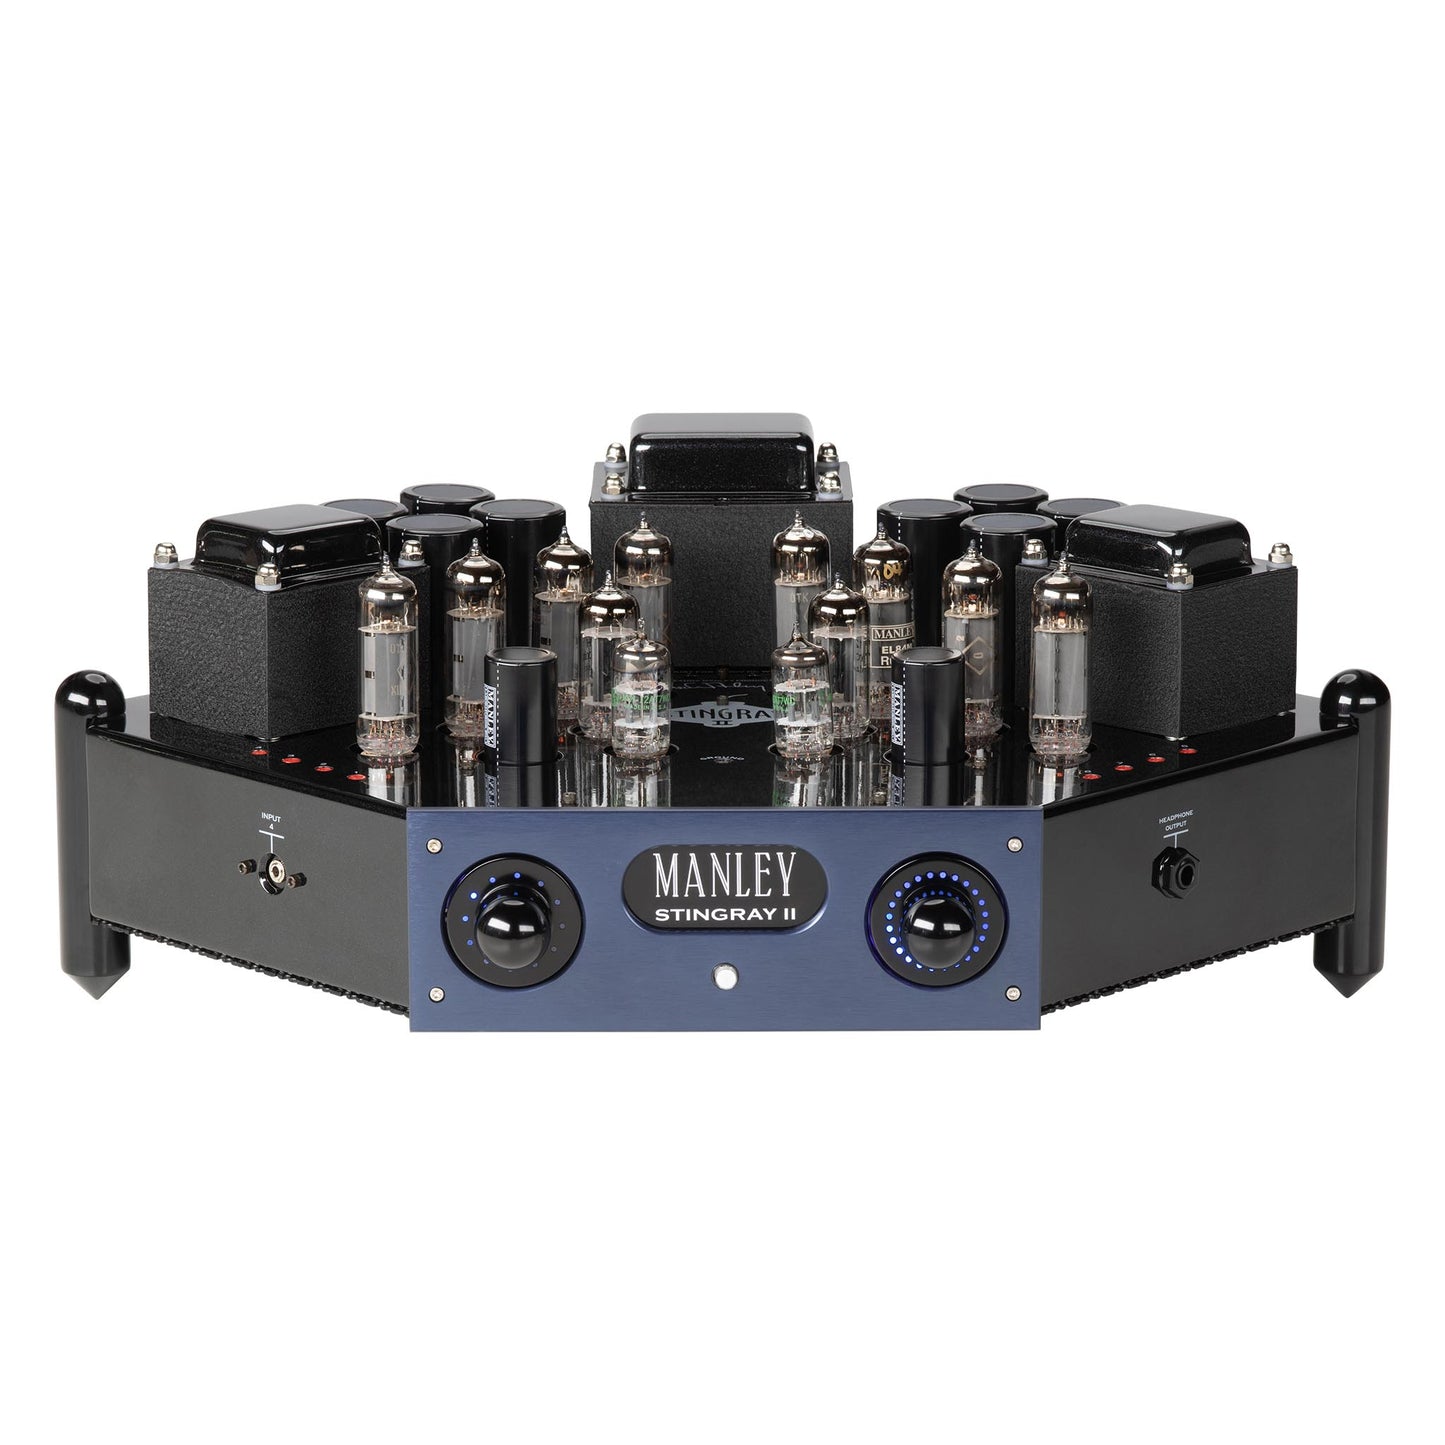 Manley Stingray II Stereo Integrated Amp